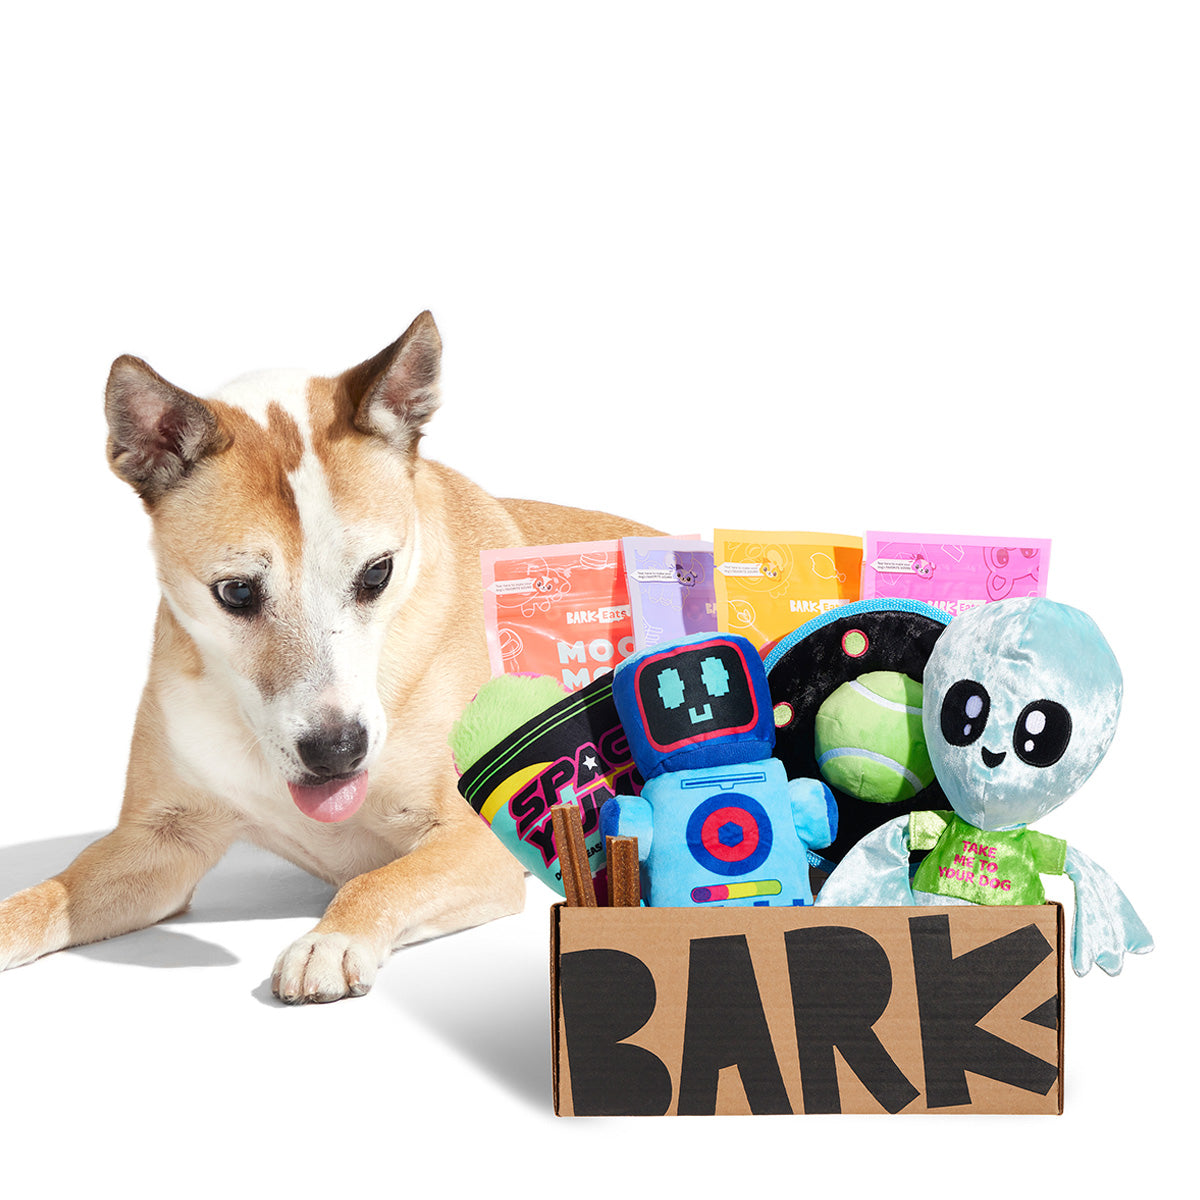 BarkBox Free Double Deluxe Upgrade: BarkBox 12 Month Subscription